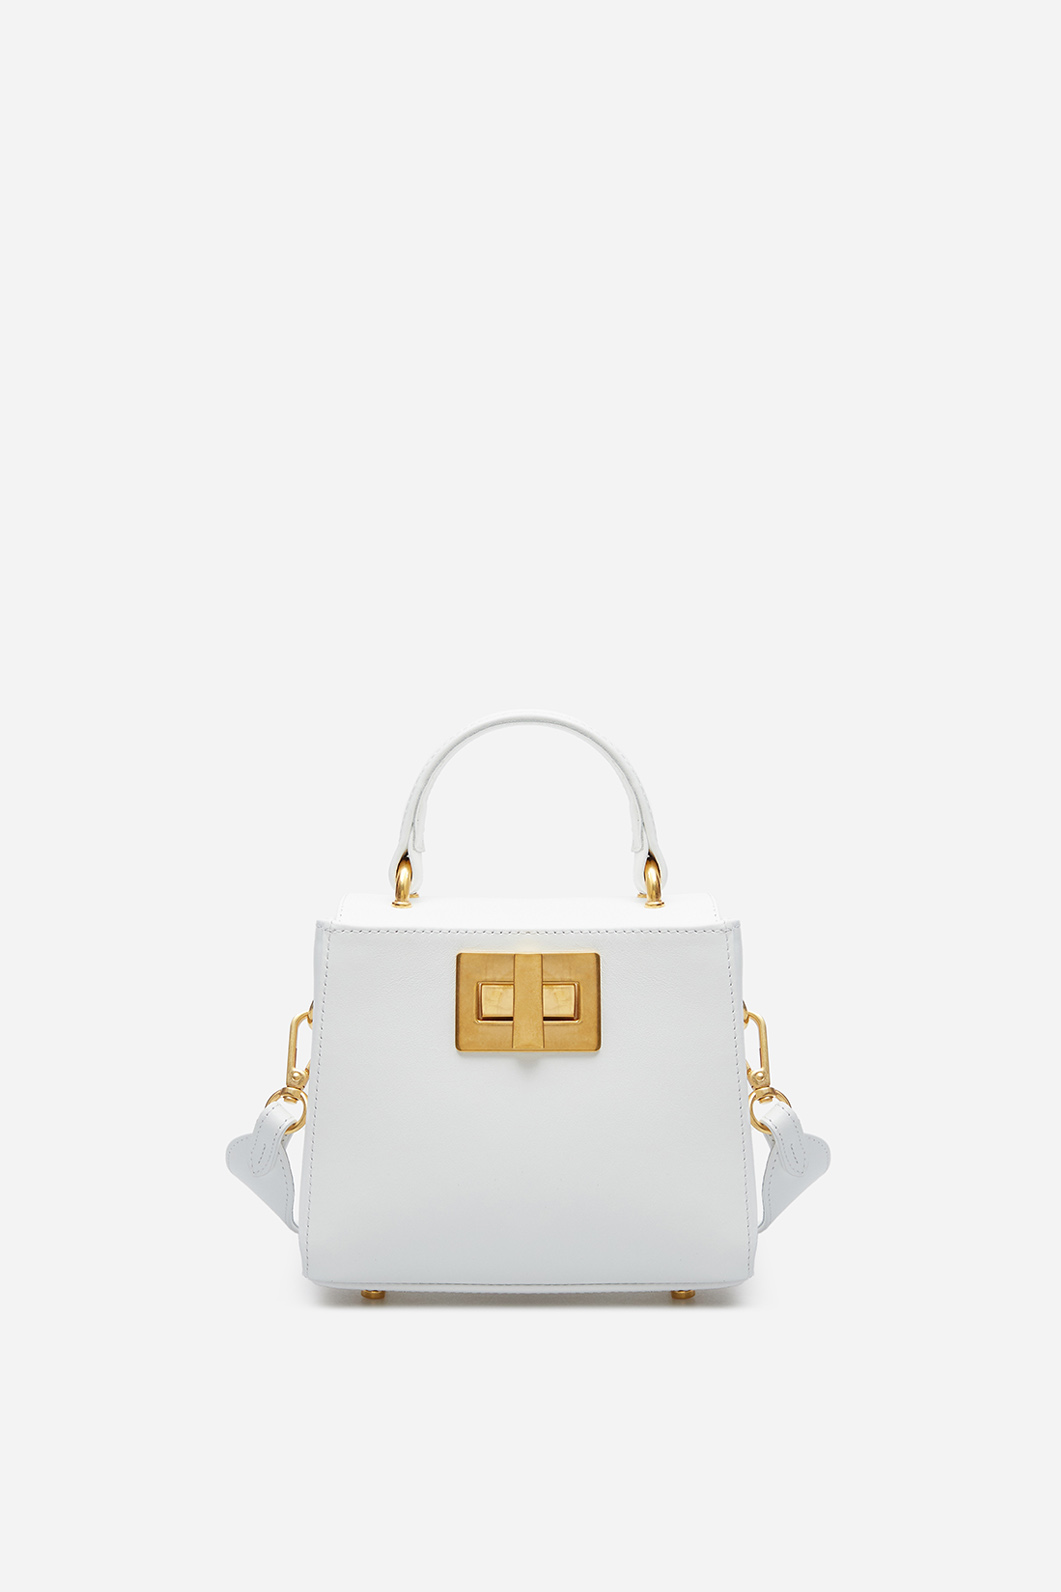 Erna micro RS white leather
city bag /gold/